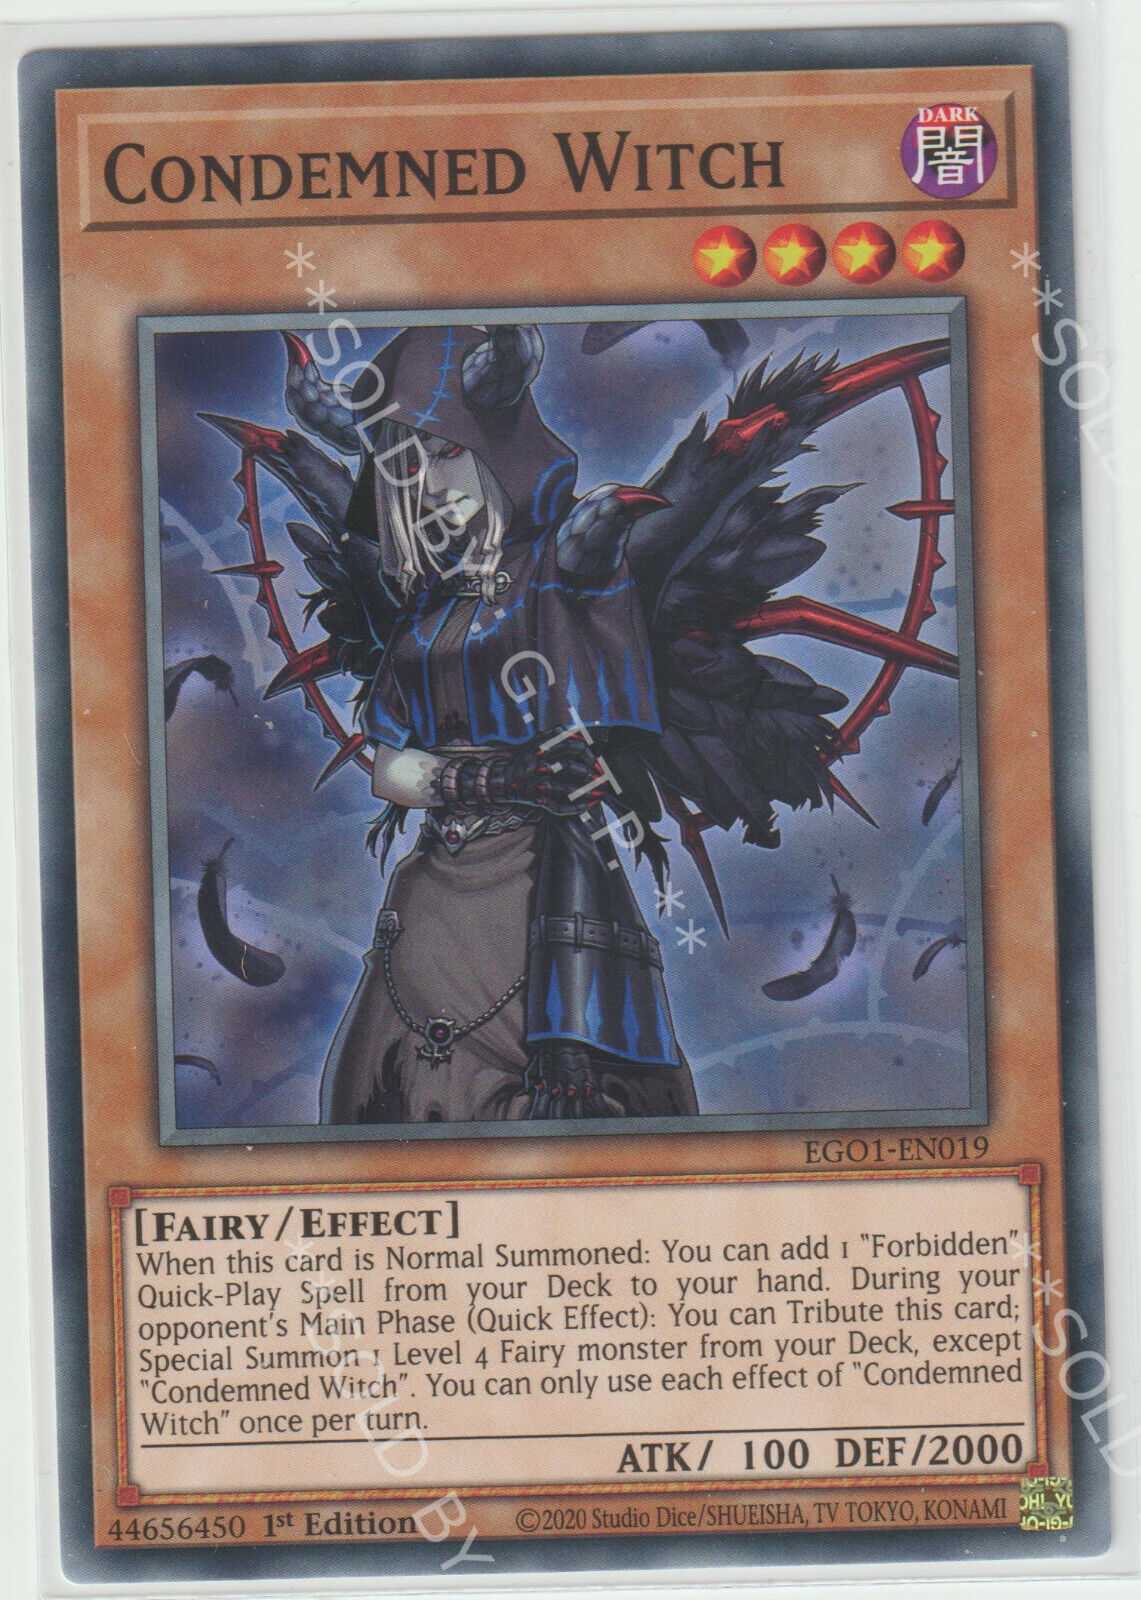 YUGIOH CONDEMNED WITCH CARD - 1ST EDITION - EGS1-EN019(X1)